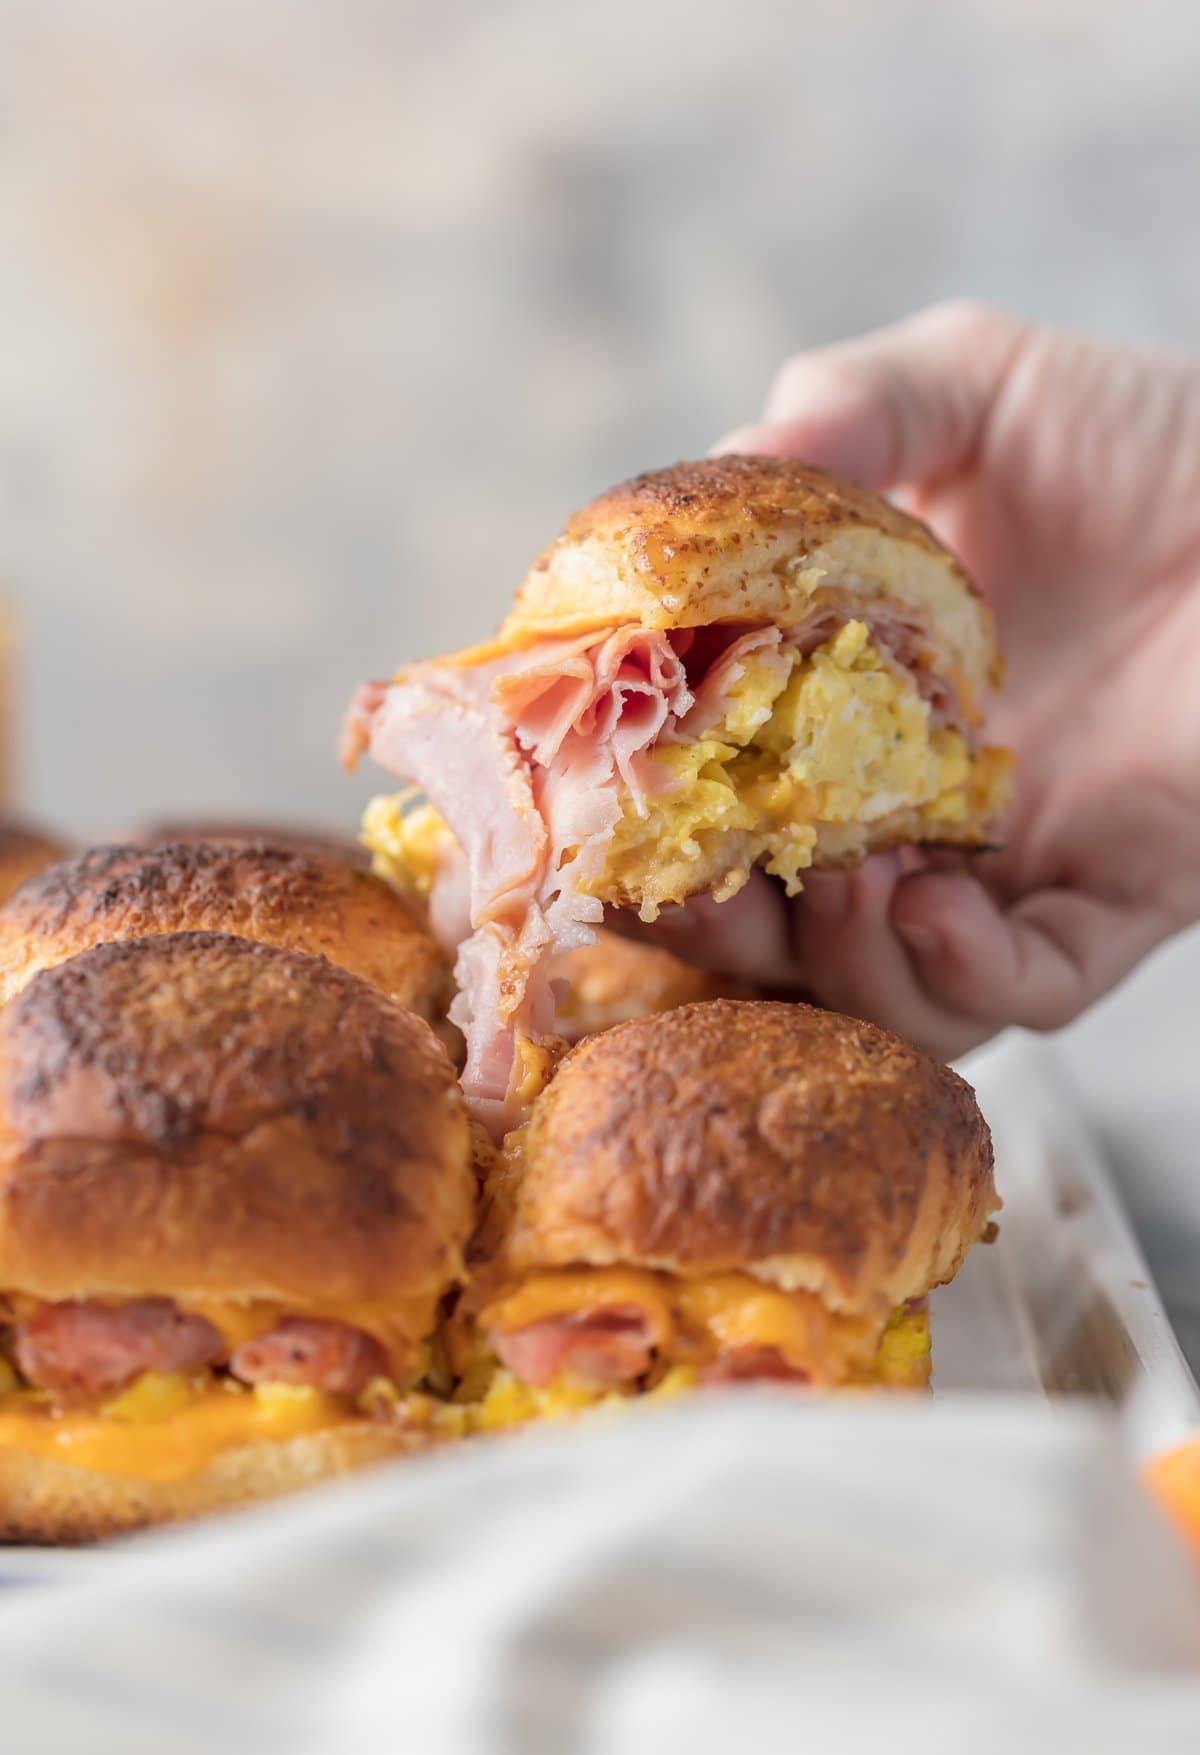 A hand picking up an egg, ham, and cheese slider